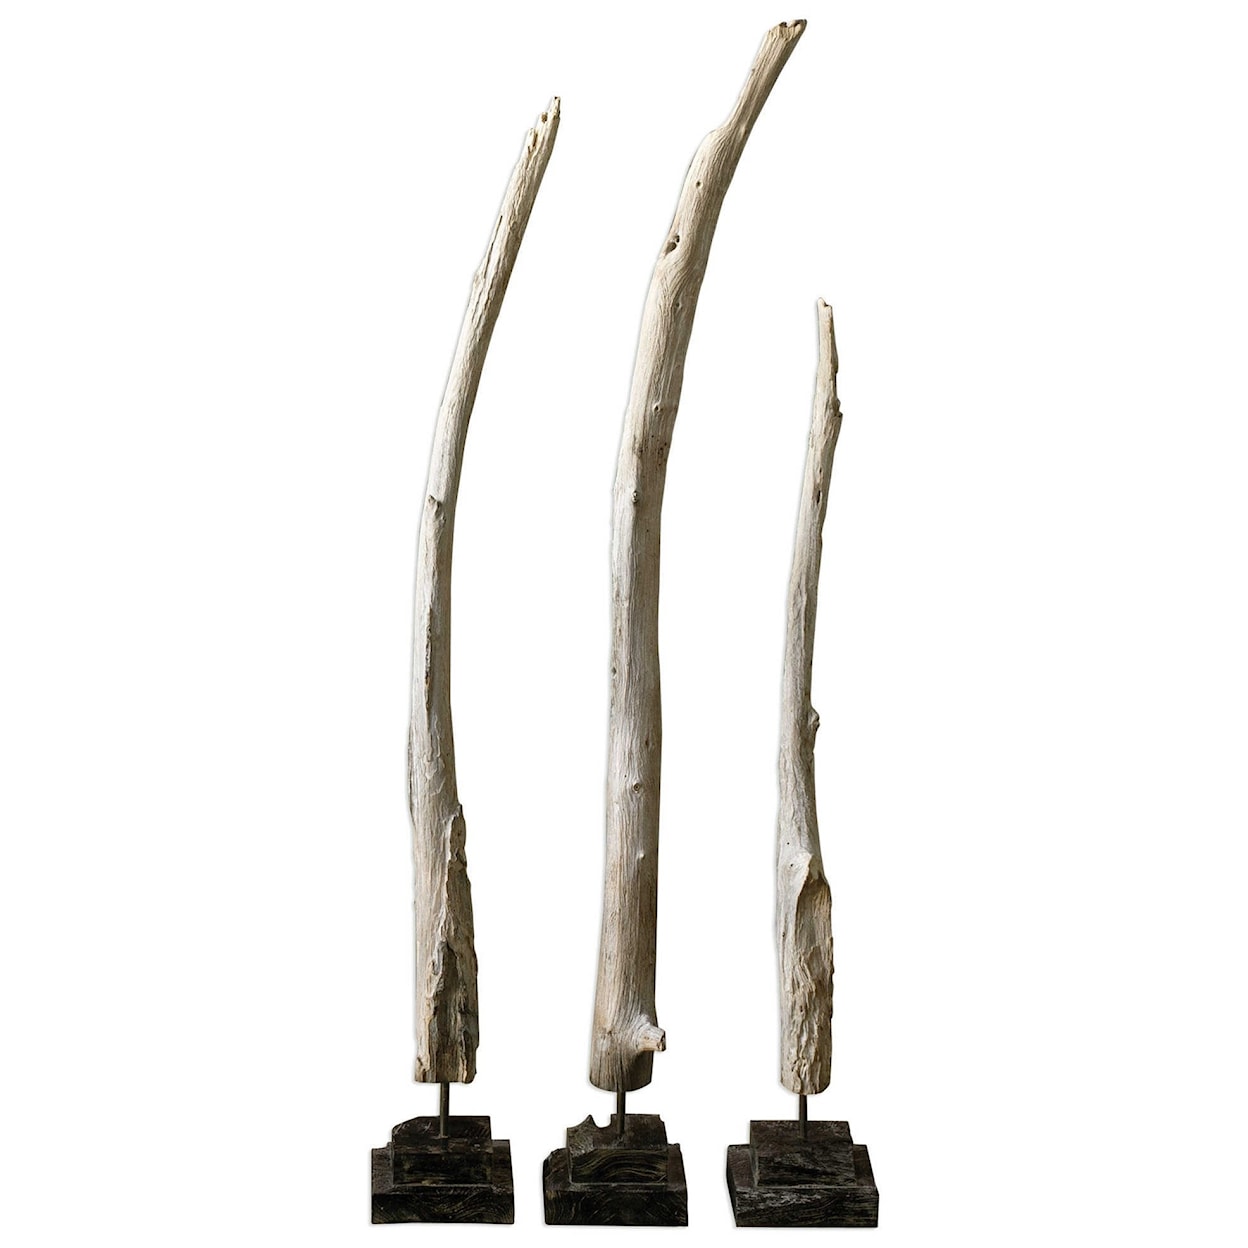 Uttermost Accessories - Statues and Figurines Teak Branches Statues, Set of 3